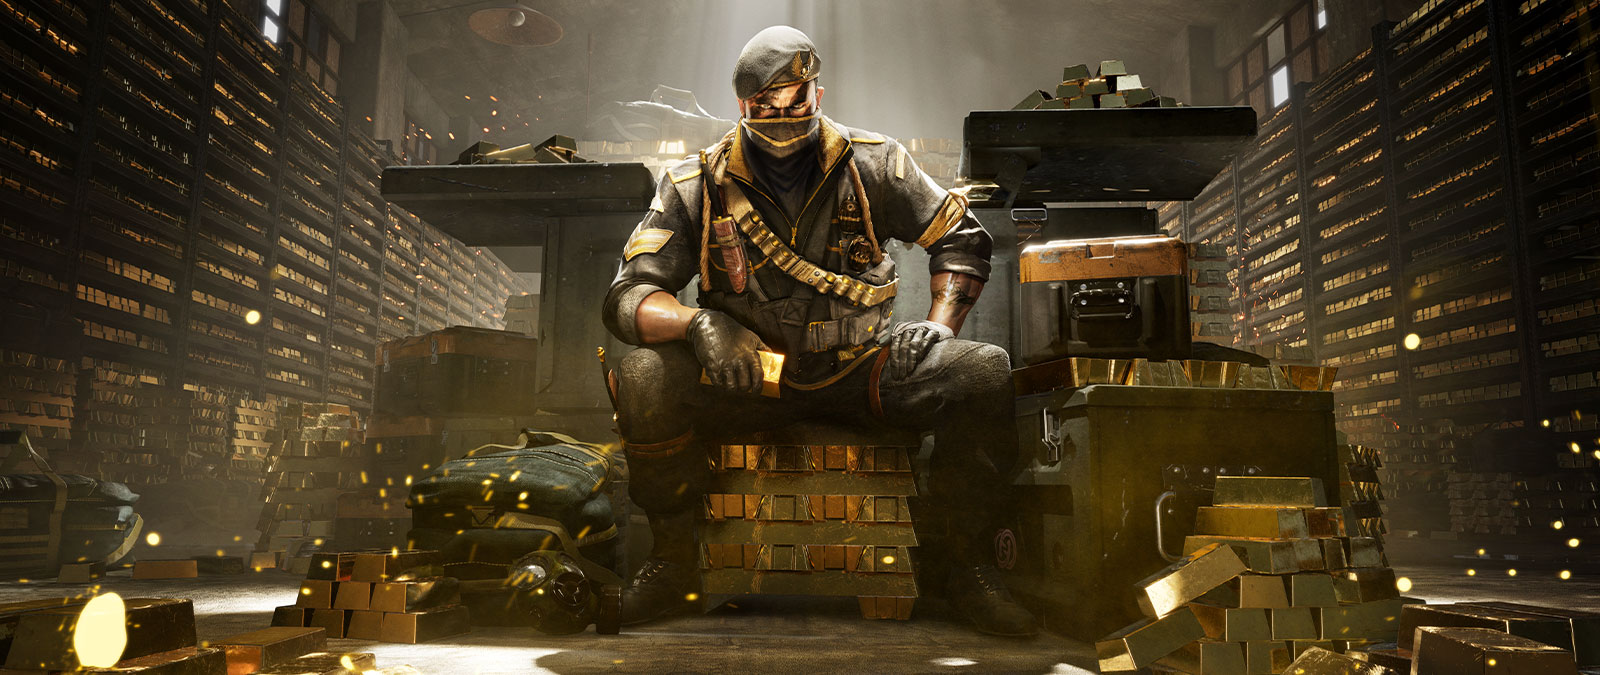 A man wearing combat gear sits on a stack of gold bars in a warehouse full of gold bars.